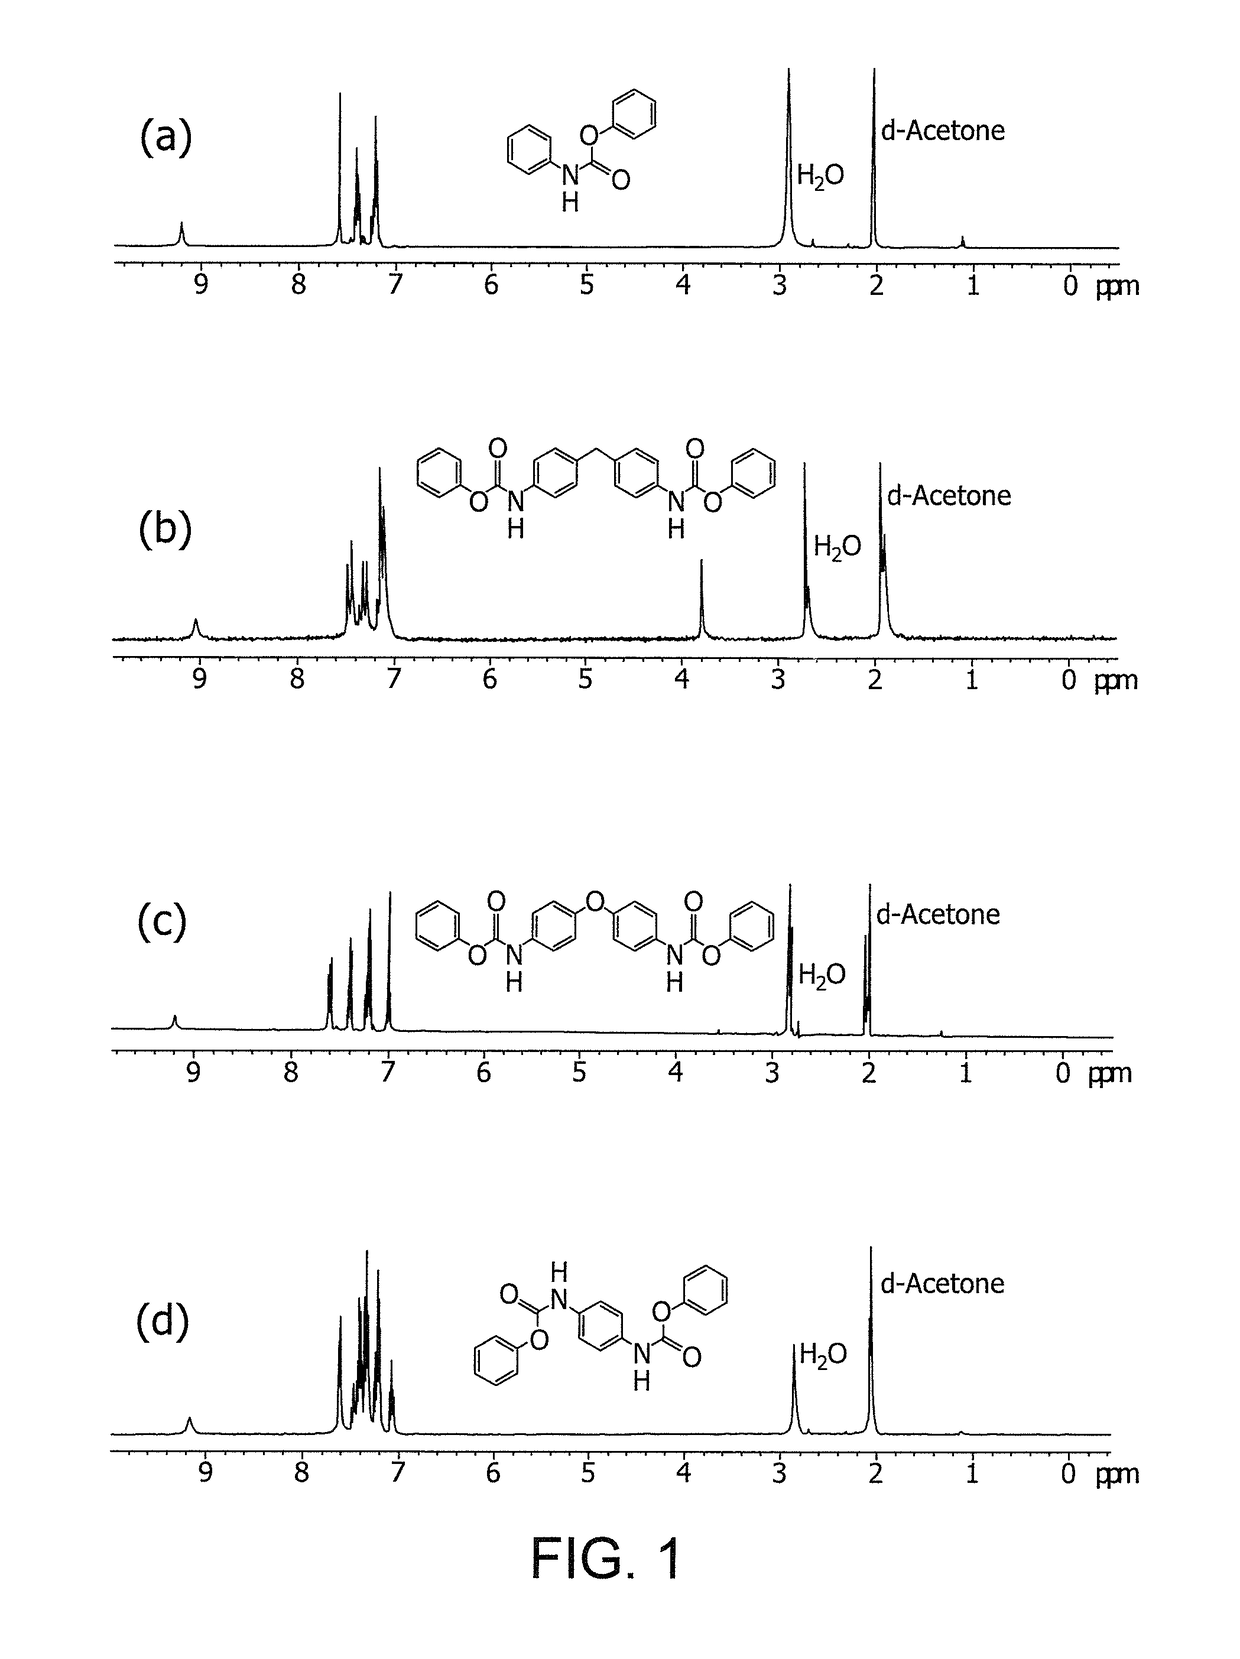 Method for producing amides or polyamides by using aromatic carbamates by way of isocyanates as precursors through catalyzed thermal processes and method for producing aromatic carbamate precursors from aromatic amines